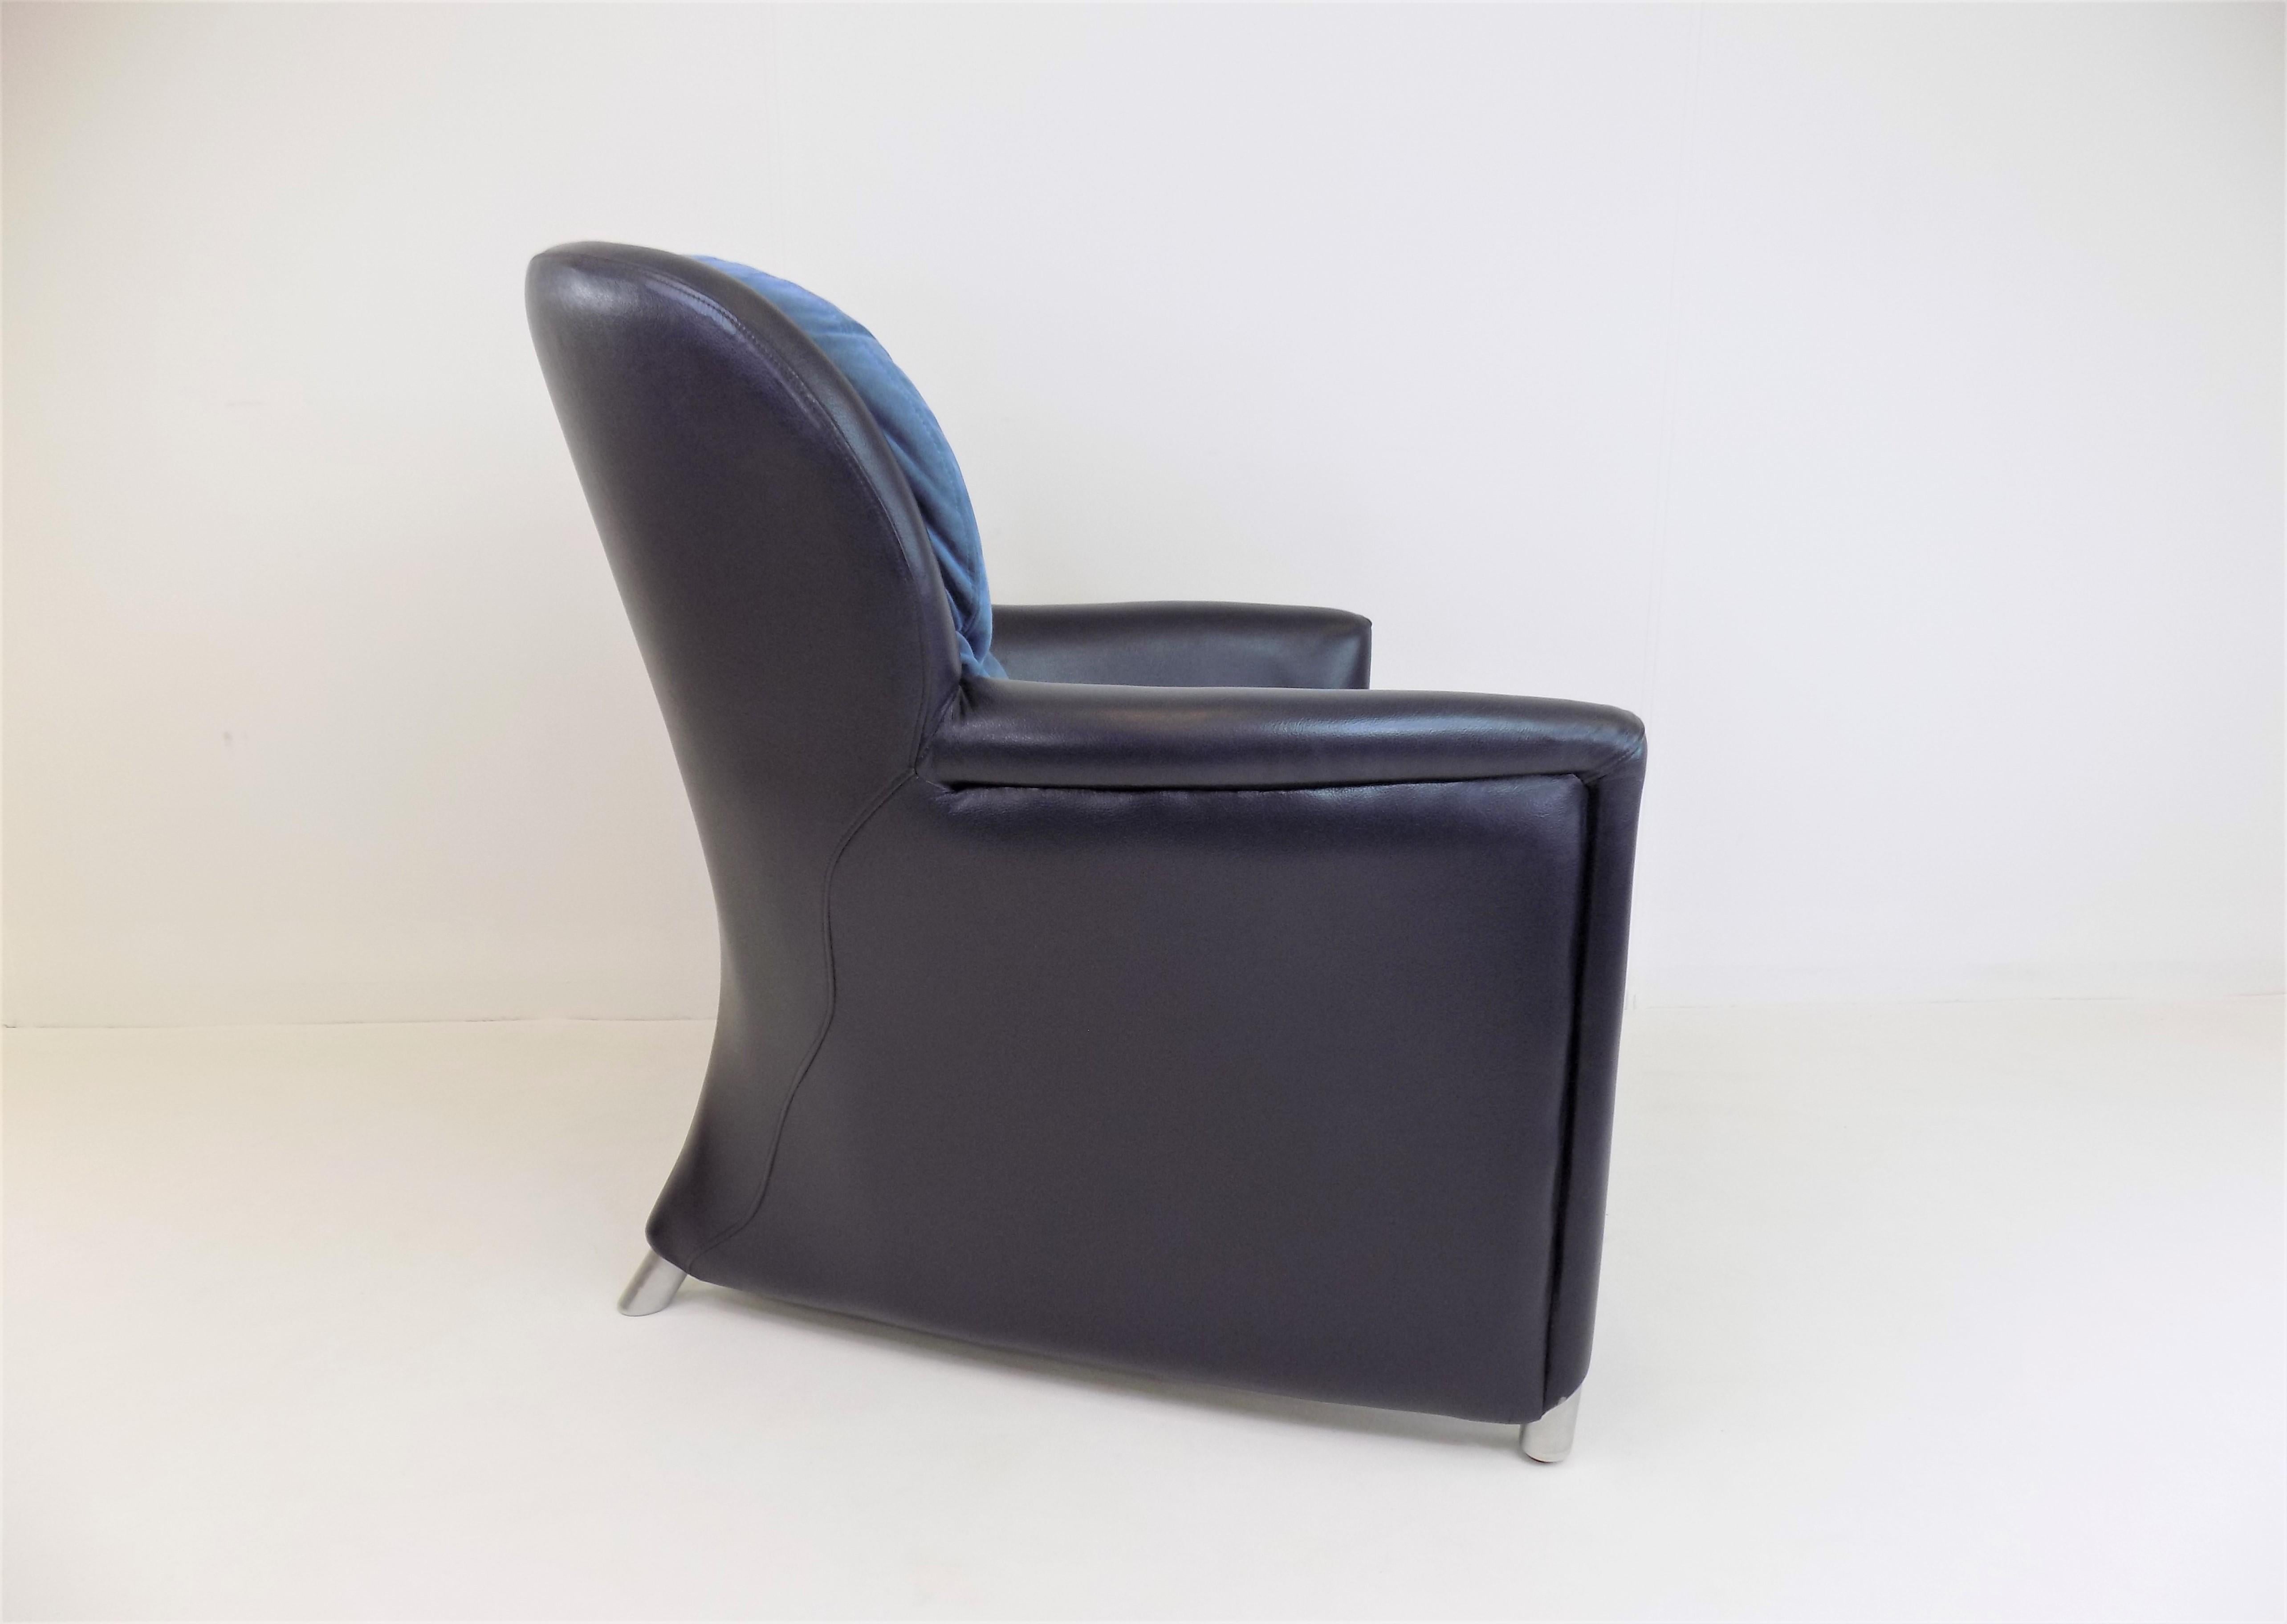 Leolux Excalibur leather armchair by Jan Armgardt 1